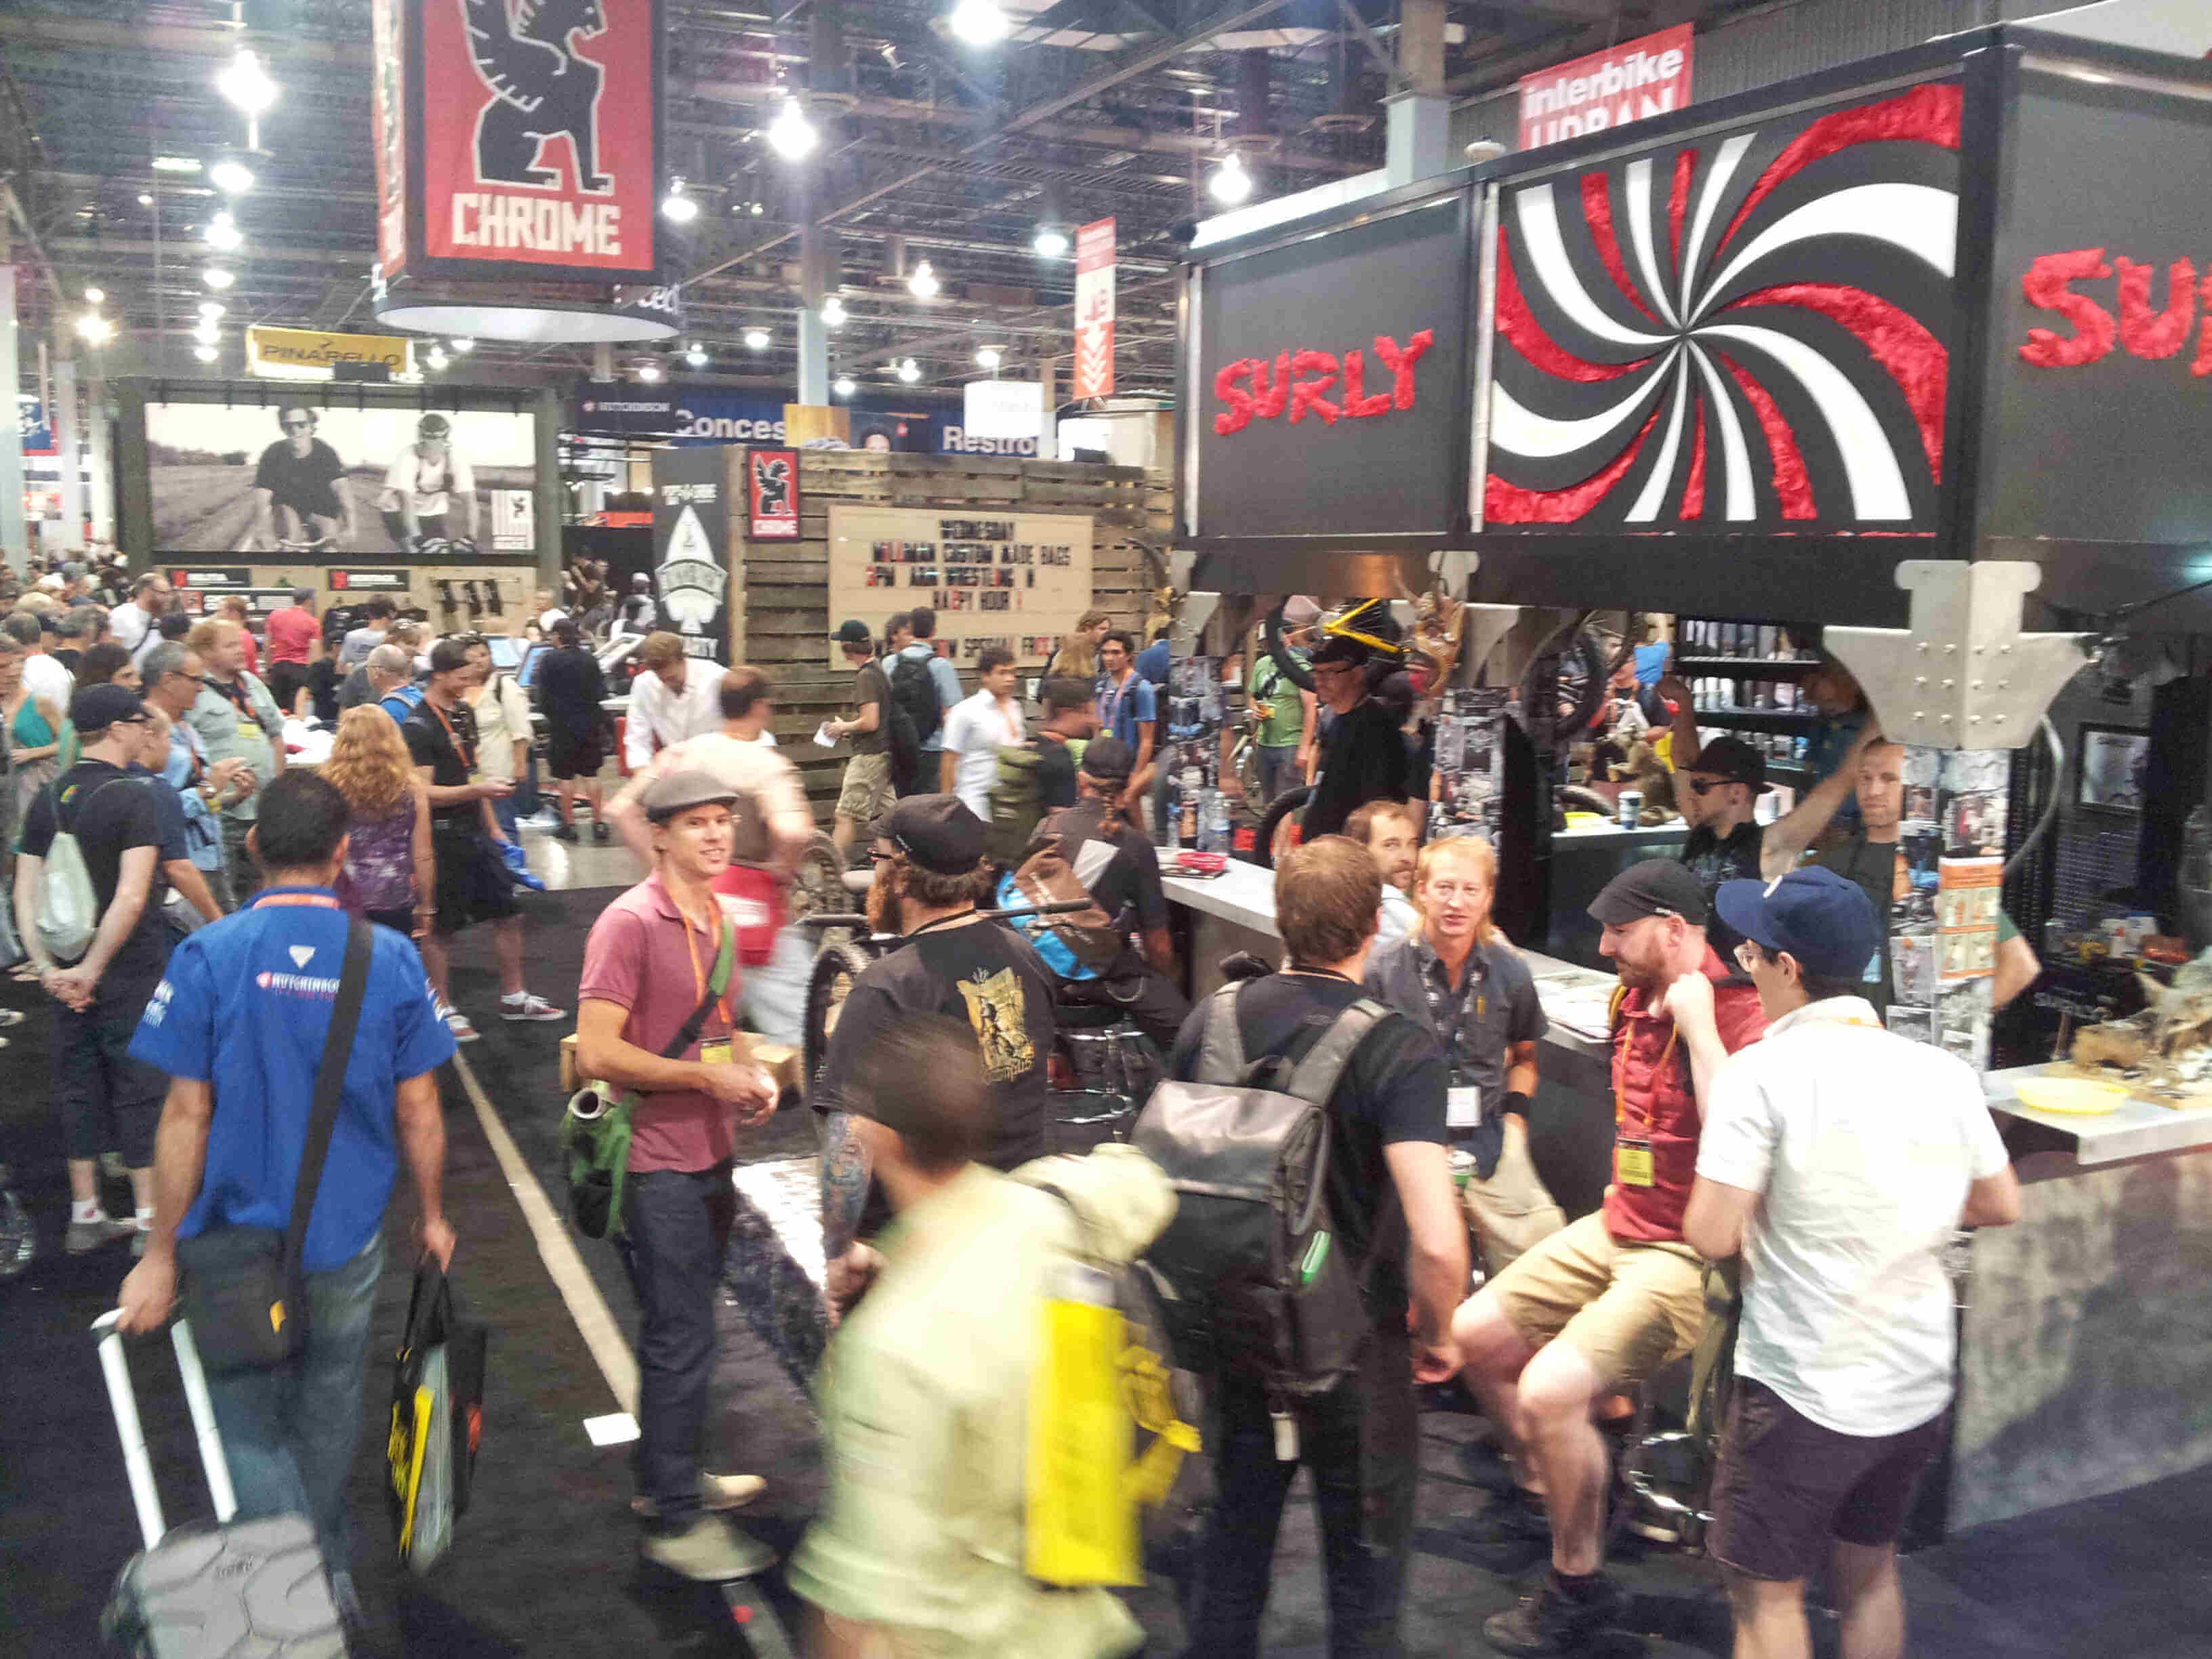 A large gathering people inside of an event center, next to the Surly Bikes display booth